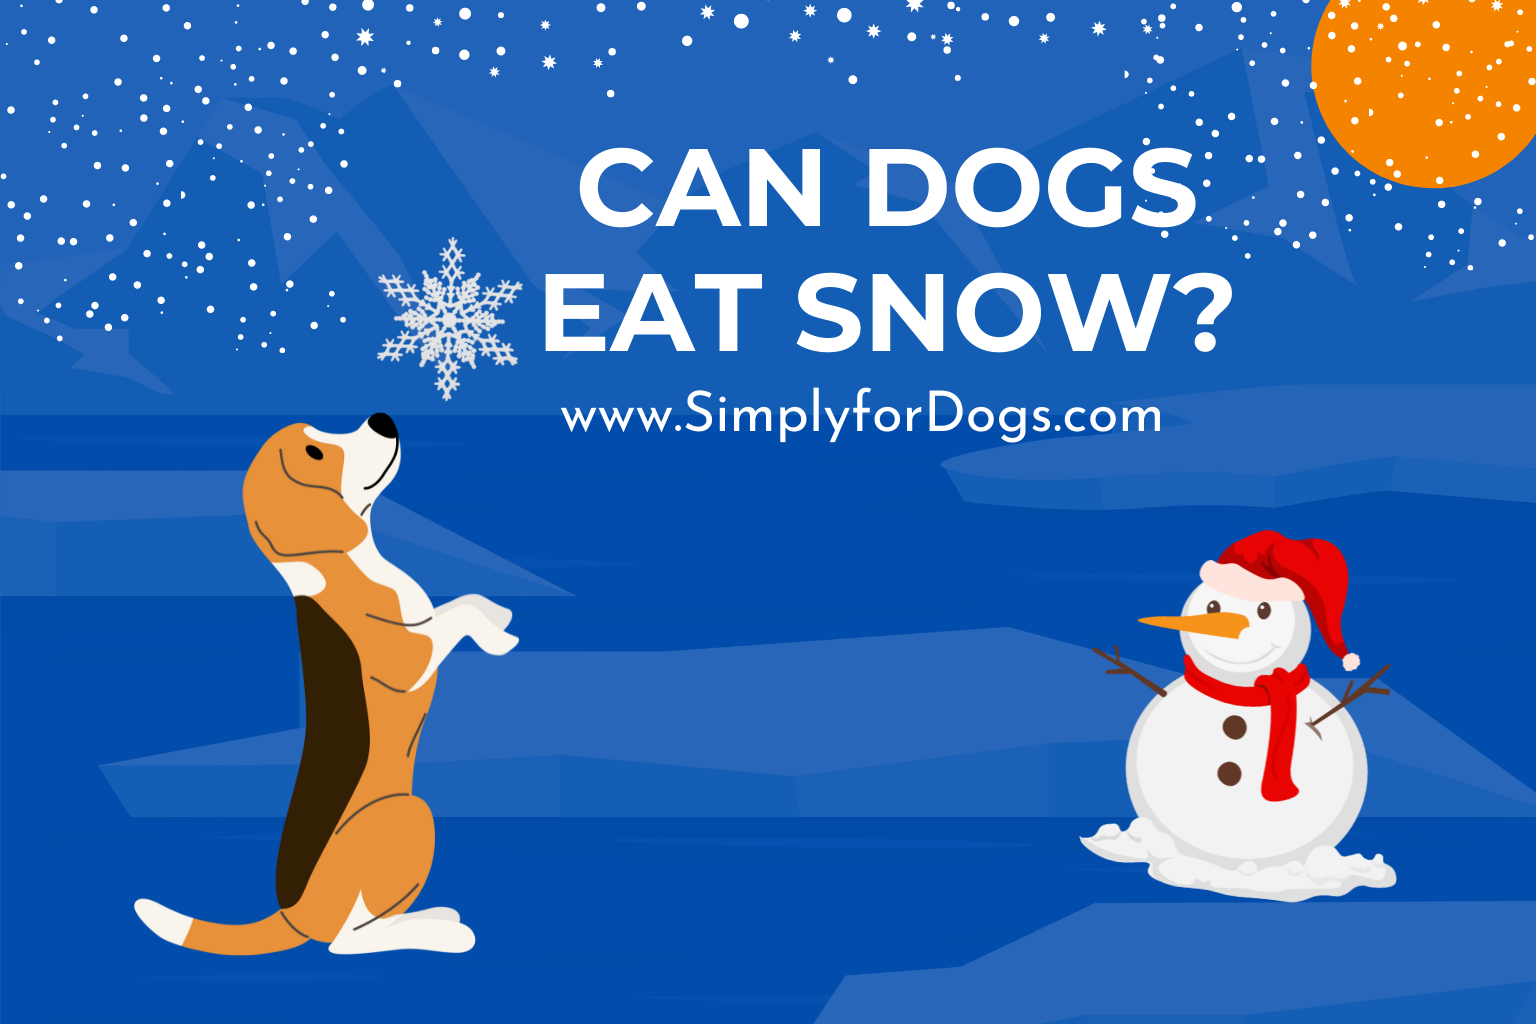 can dogs eat snow